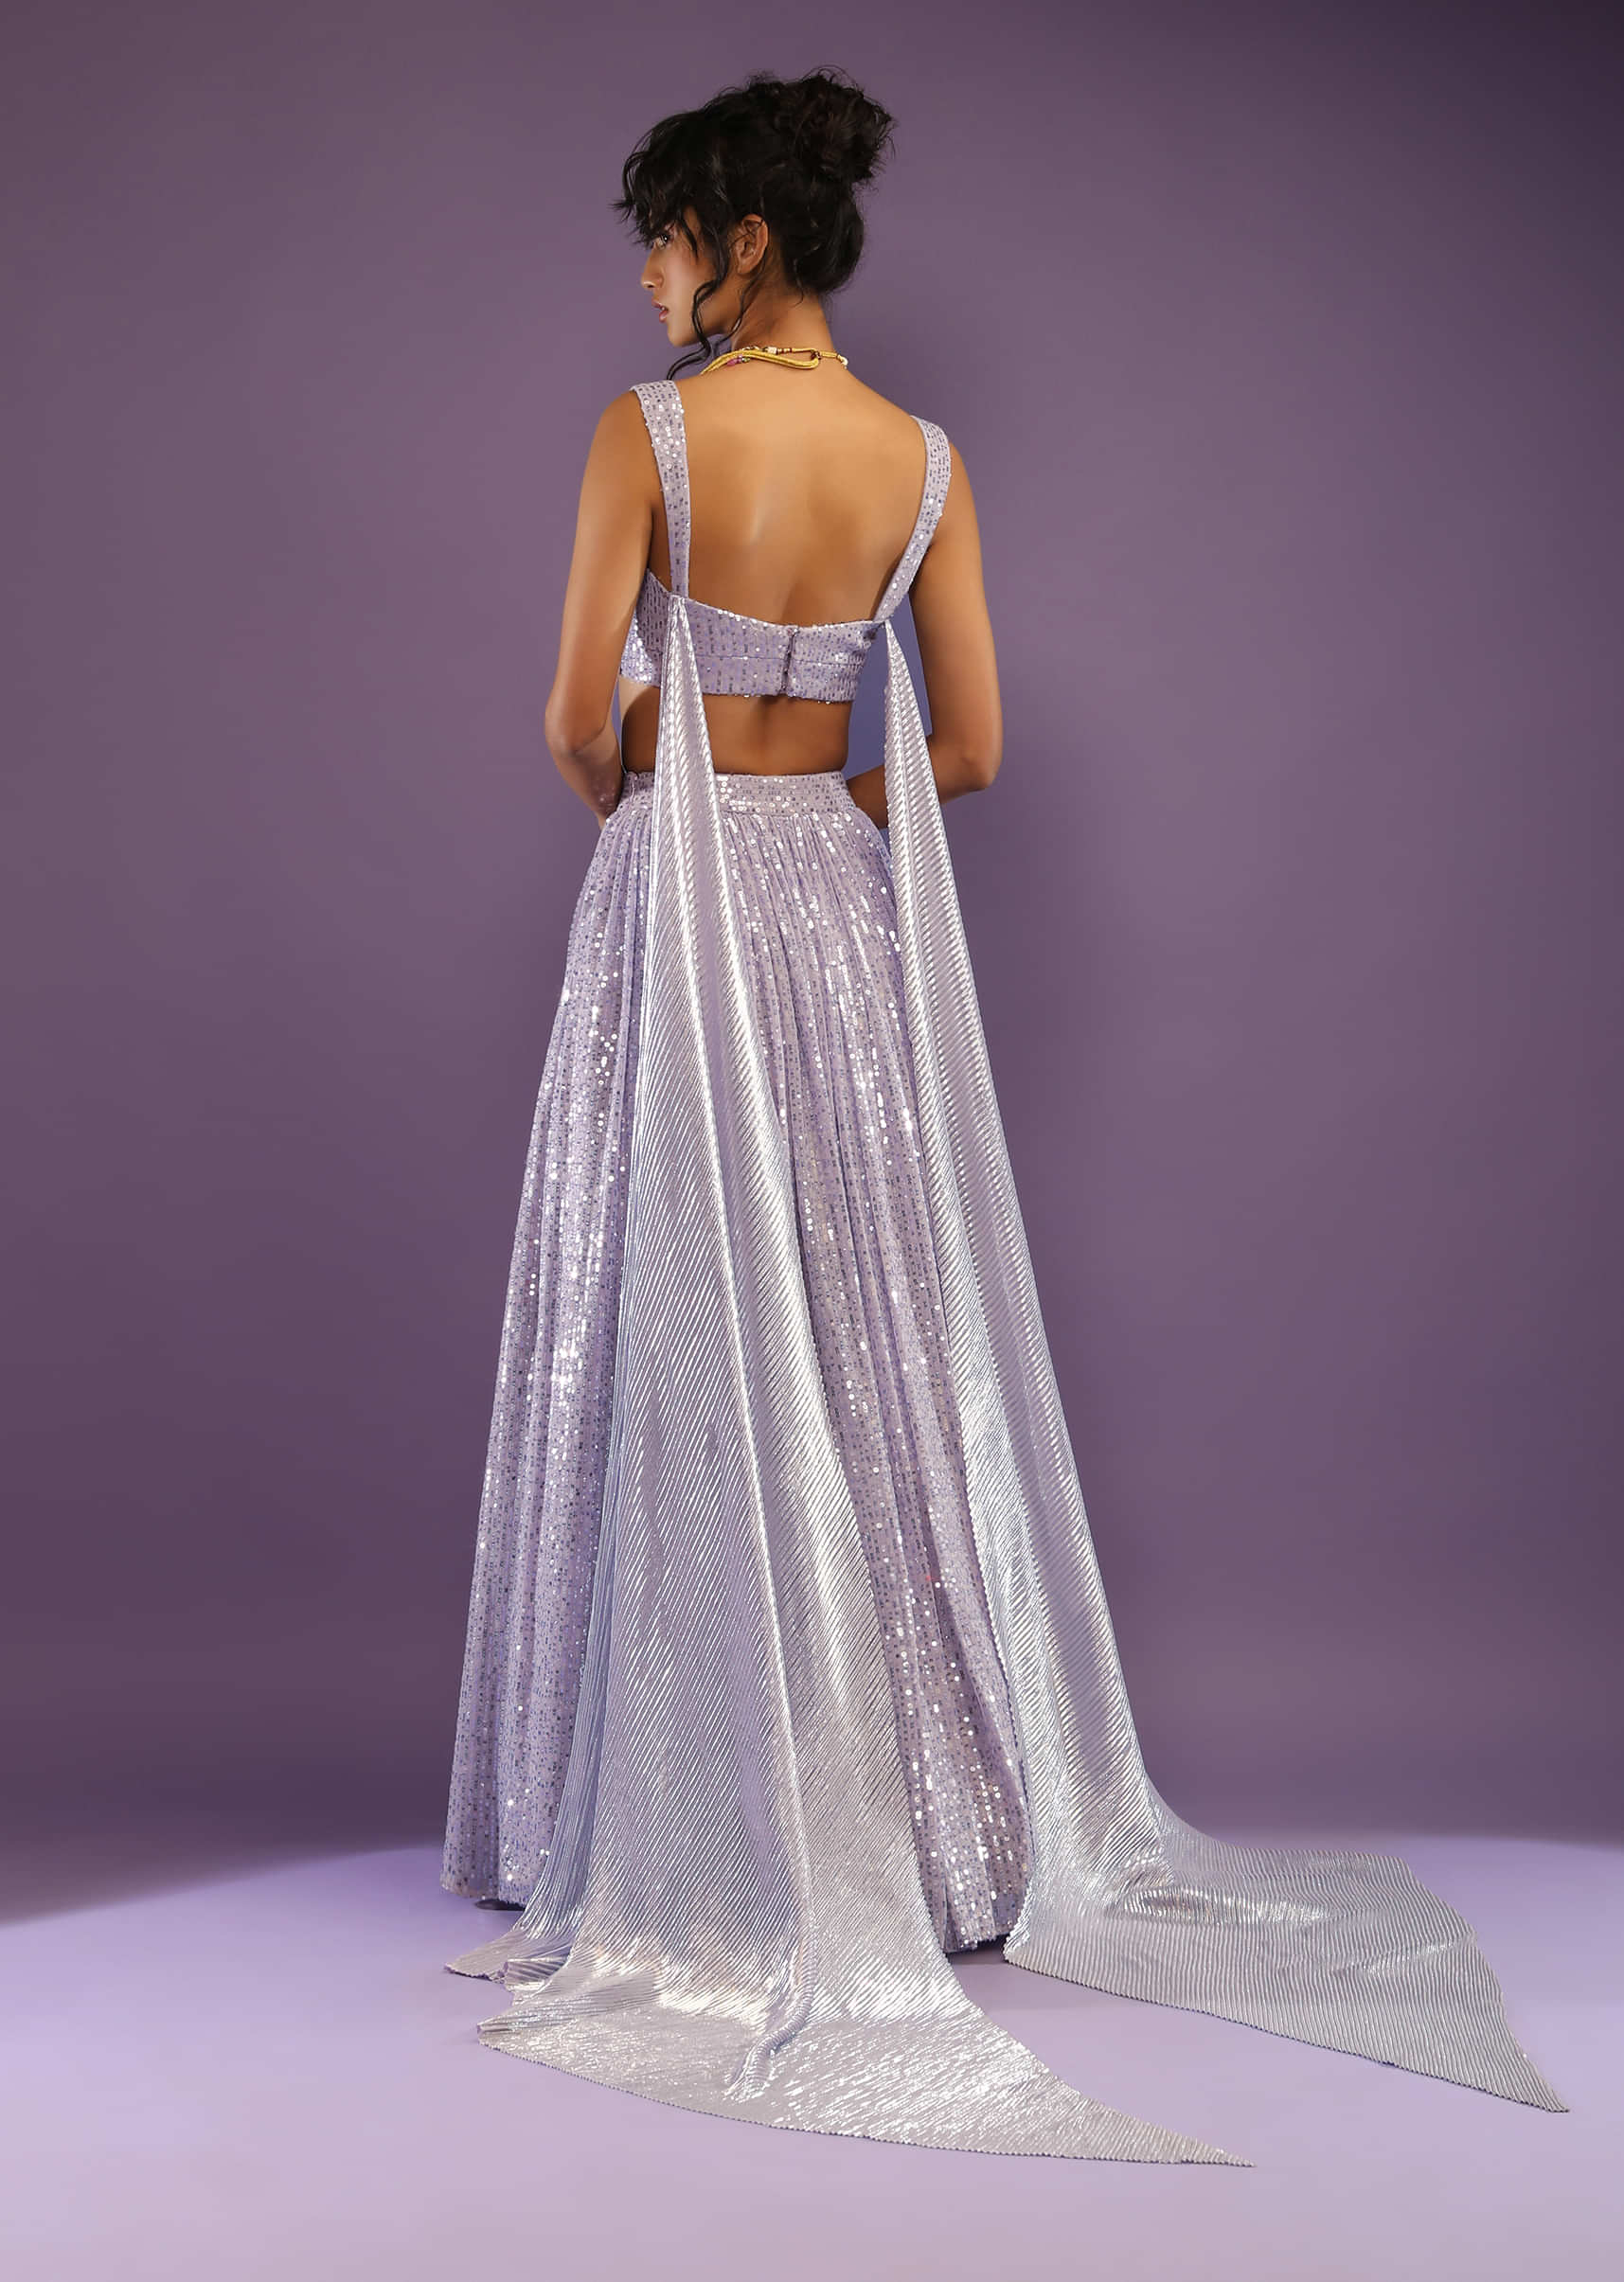 Lavender Skirt And Crop Top Embellished In Sequins With Attached Drape On The Back